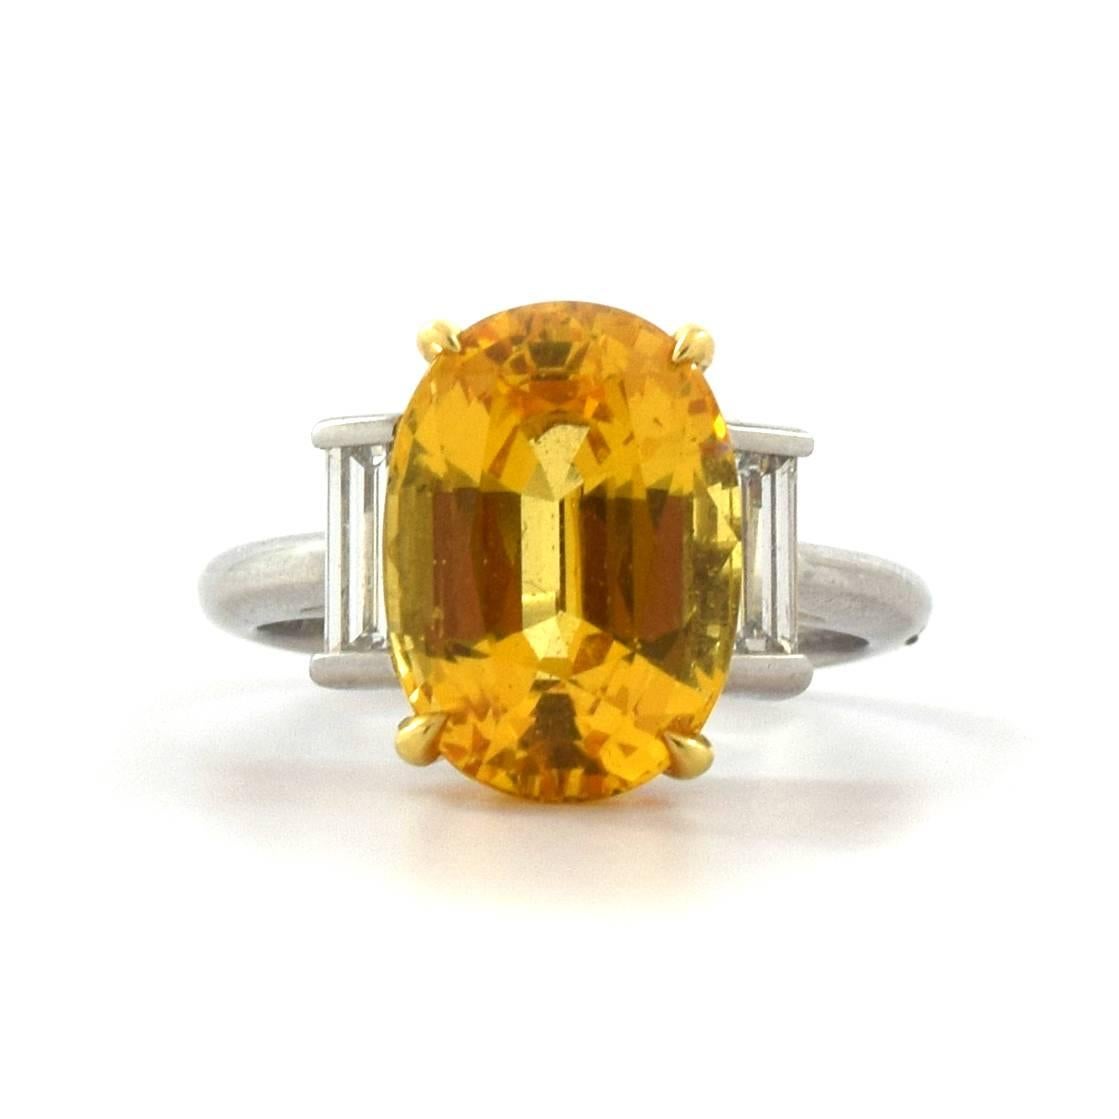 This Tiffany & Co ring is definitely a beauty. The ring is accented by two long baguette diamonds. the center stone is a lively oval shaped Yellow Sapphire weighing 7.42 carats graded by the American Gemological Laboratories (AGL) as unheated